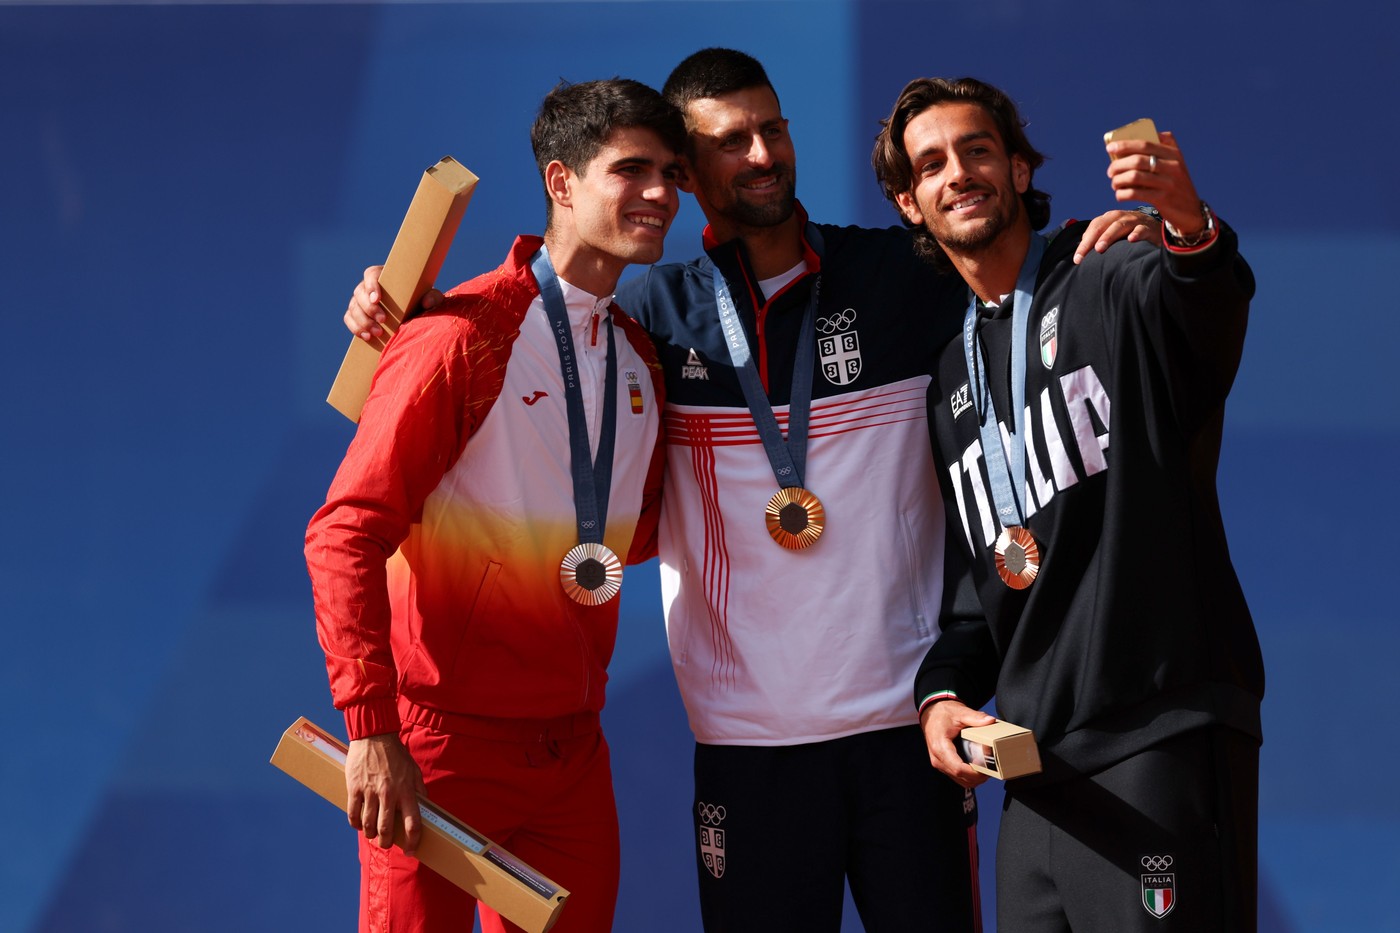 Silver Medalist Carlos Alcaraz of Spain (left), Gold Medalist Novak Djokovic of Serbia (centre) and Bronze Medalist Lorenzo Musetti (right)
Paris 2024 Olympic Games, Day Nine, Paris, France - 04 Aug 2024,Image: 895908936, License: Rights-managed, Restrictions: , Model Release: no